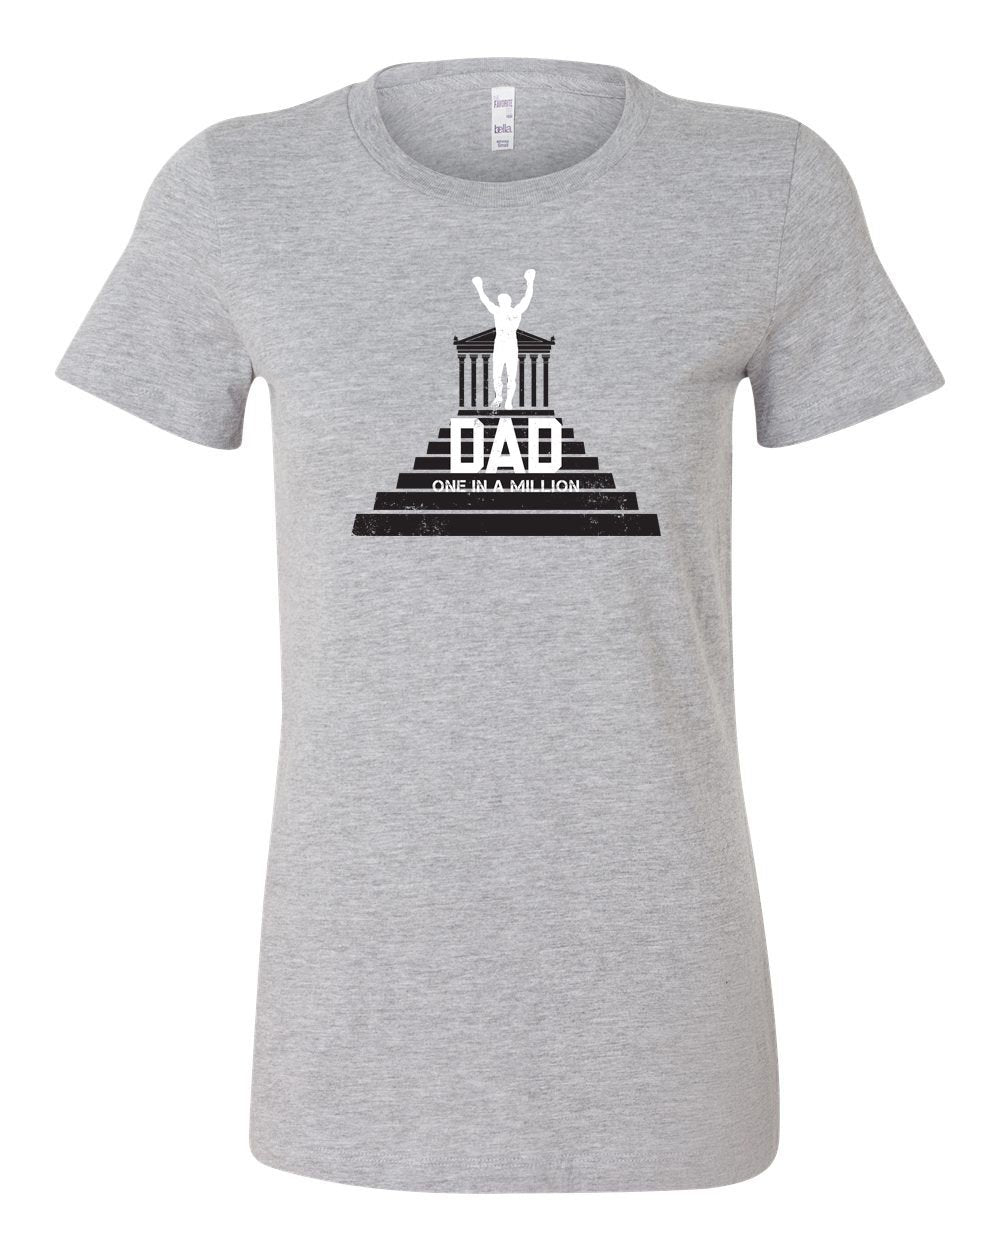 One in a Million Dad LADIES Junior-Fit T-Shirt